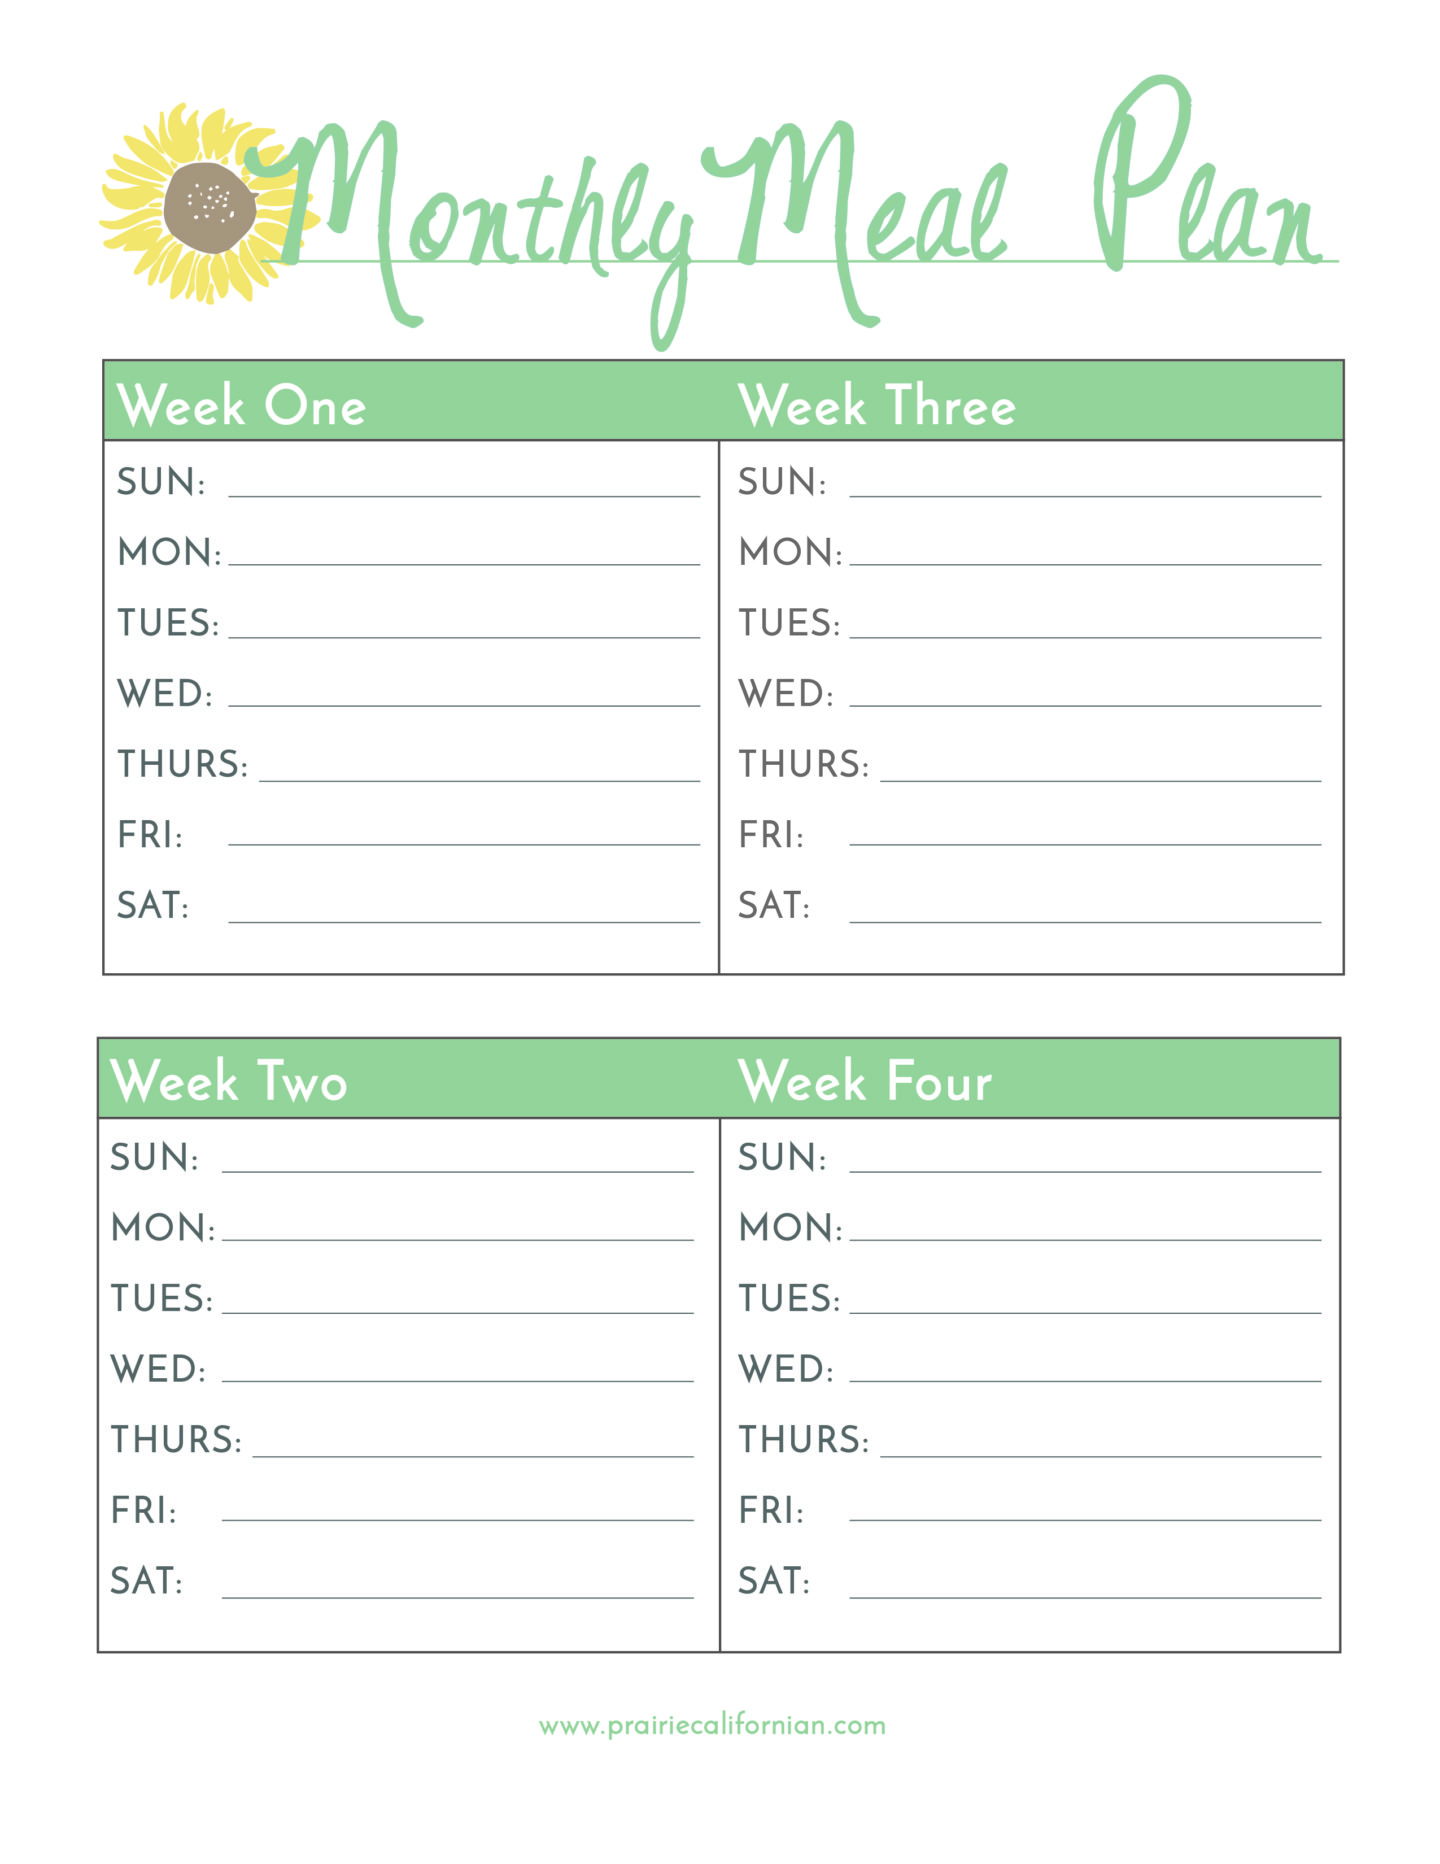 Monthly Meal Plan Printable 01